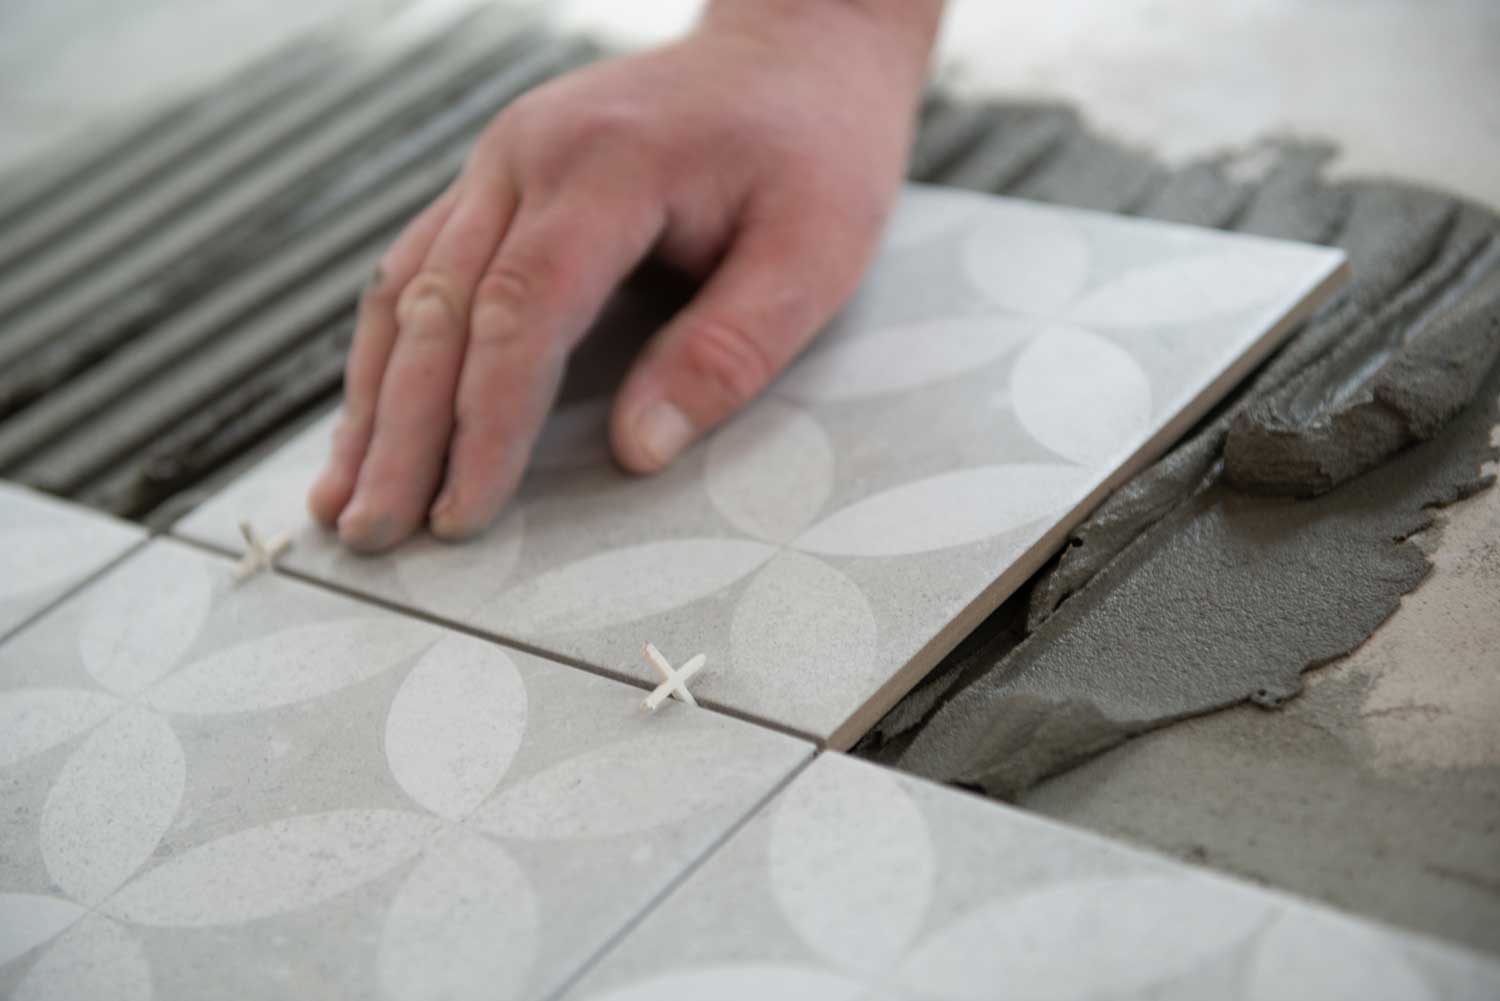 Seal your tile grout lines to keep beautiful tile floors - tips from Footprints Floors in Madison.